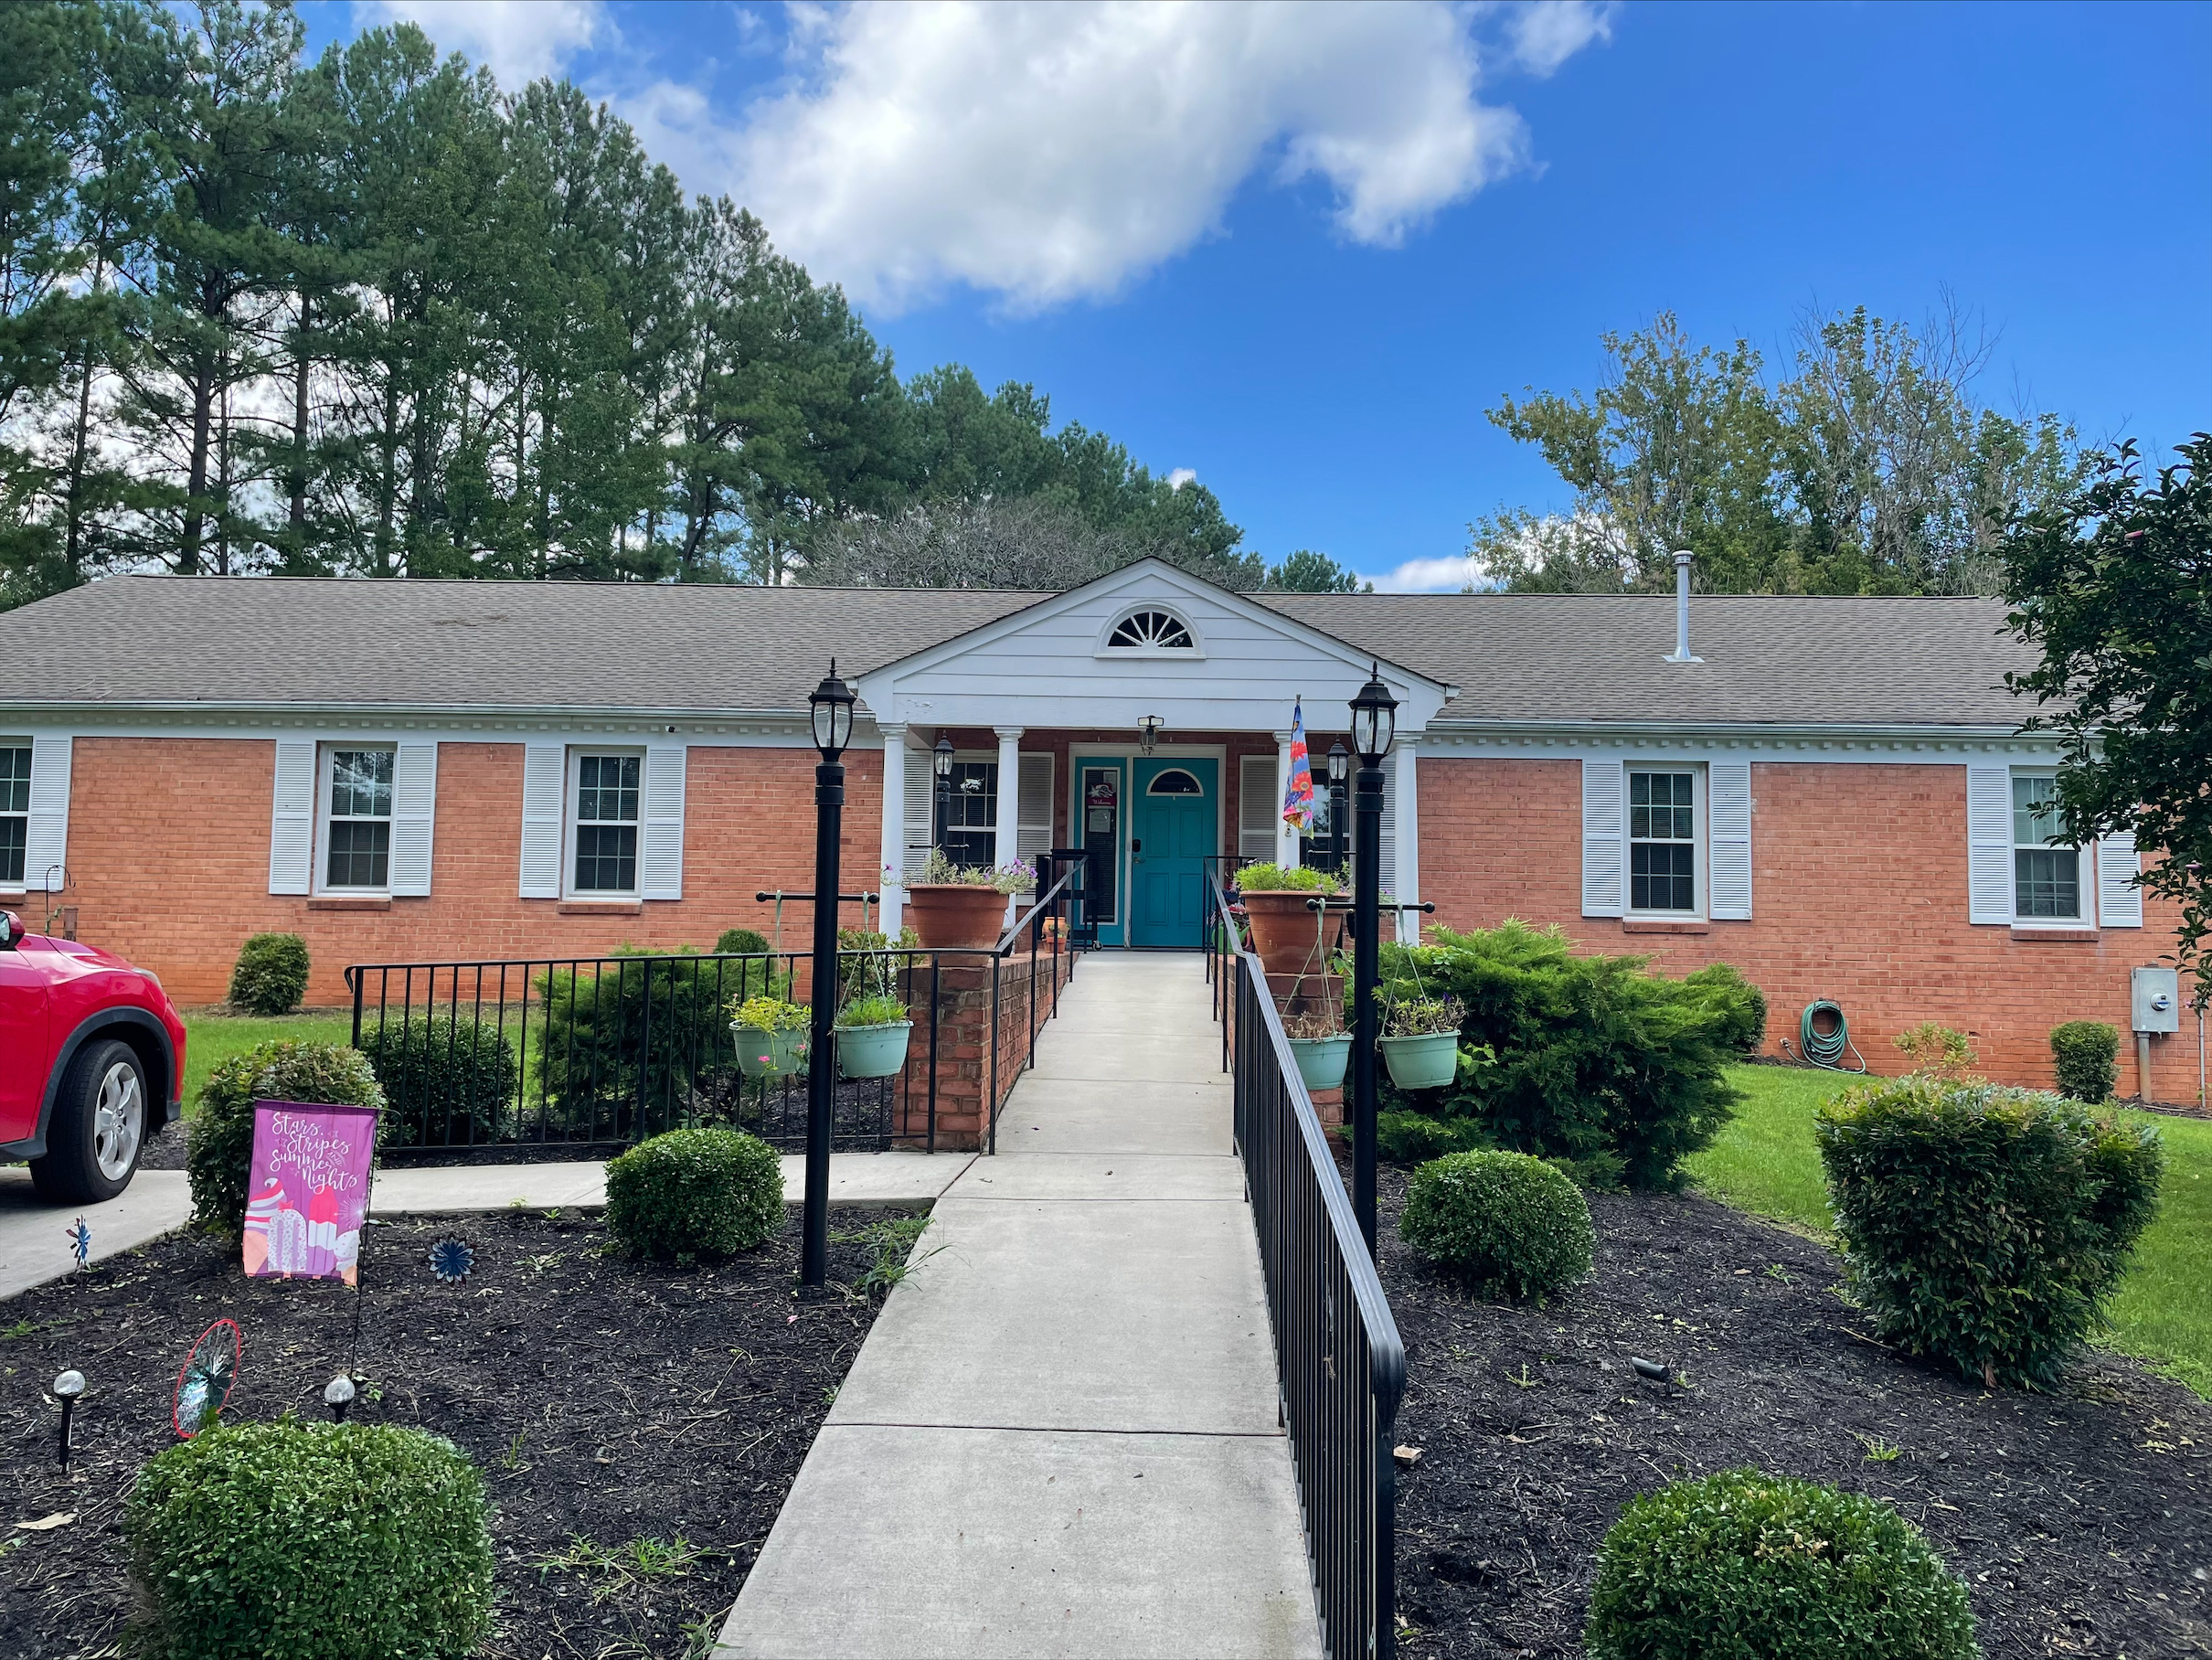 Deerfield Group Home - Lynchburg, VA - Residential Support - Serving disabilities in virginia with sponsored residential support and group homes in virginia